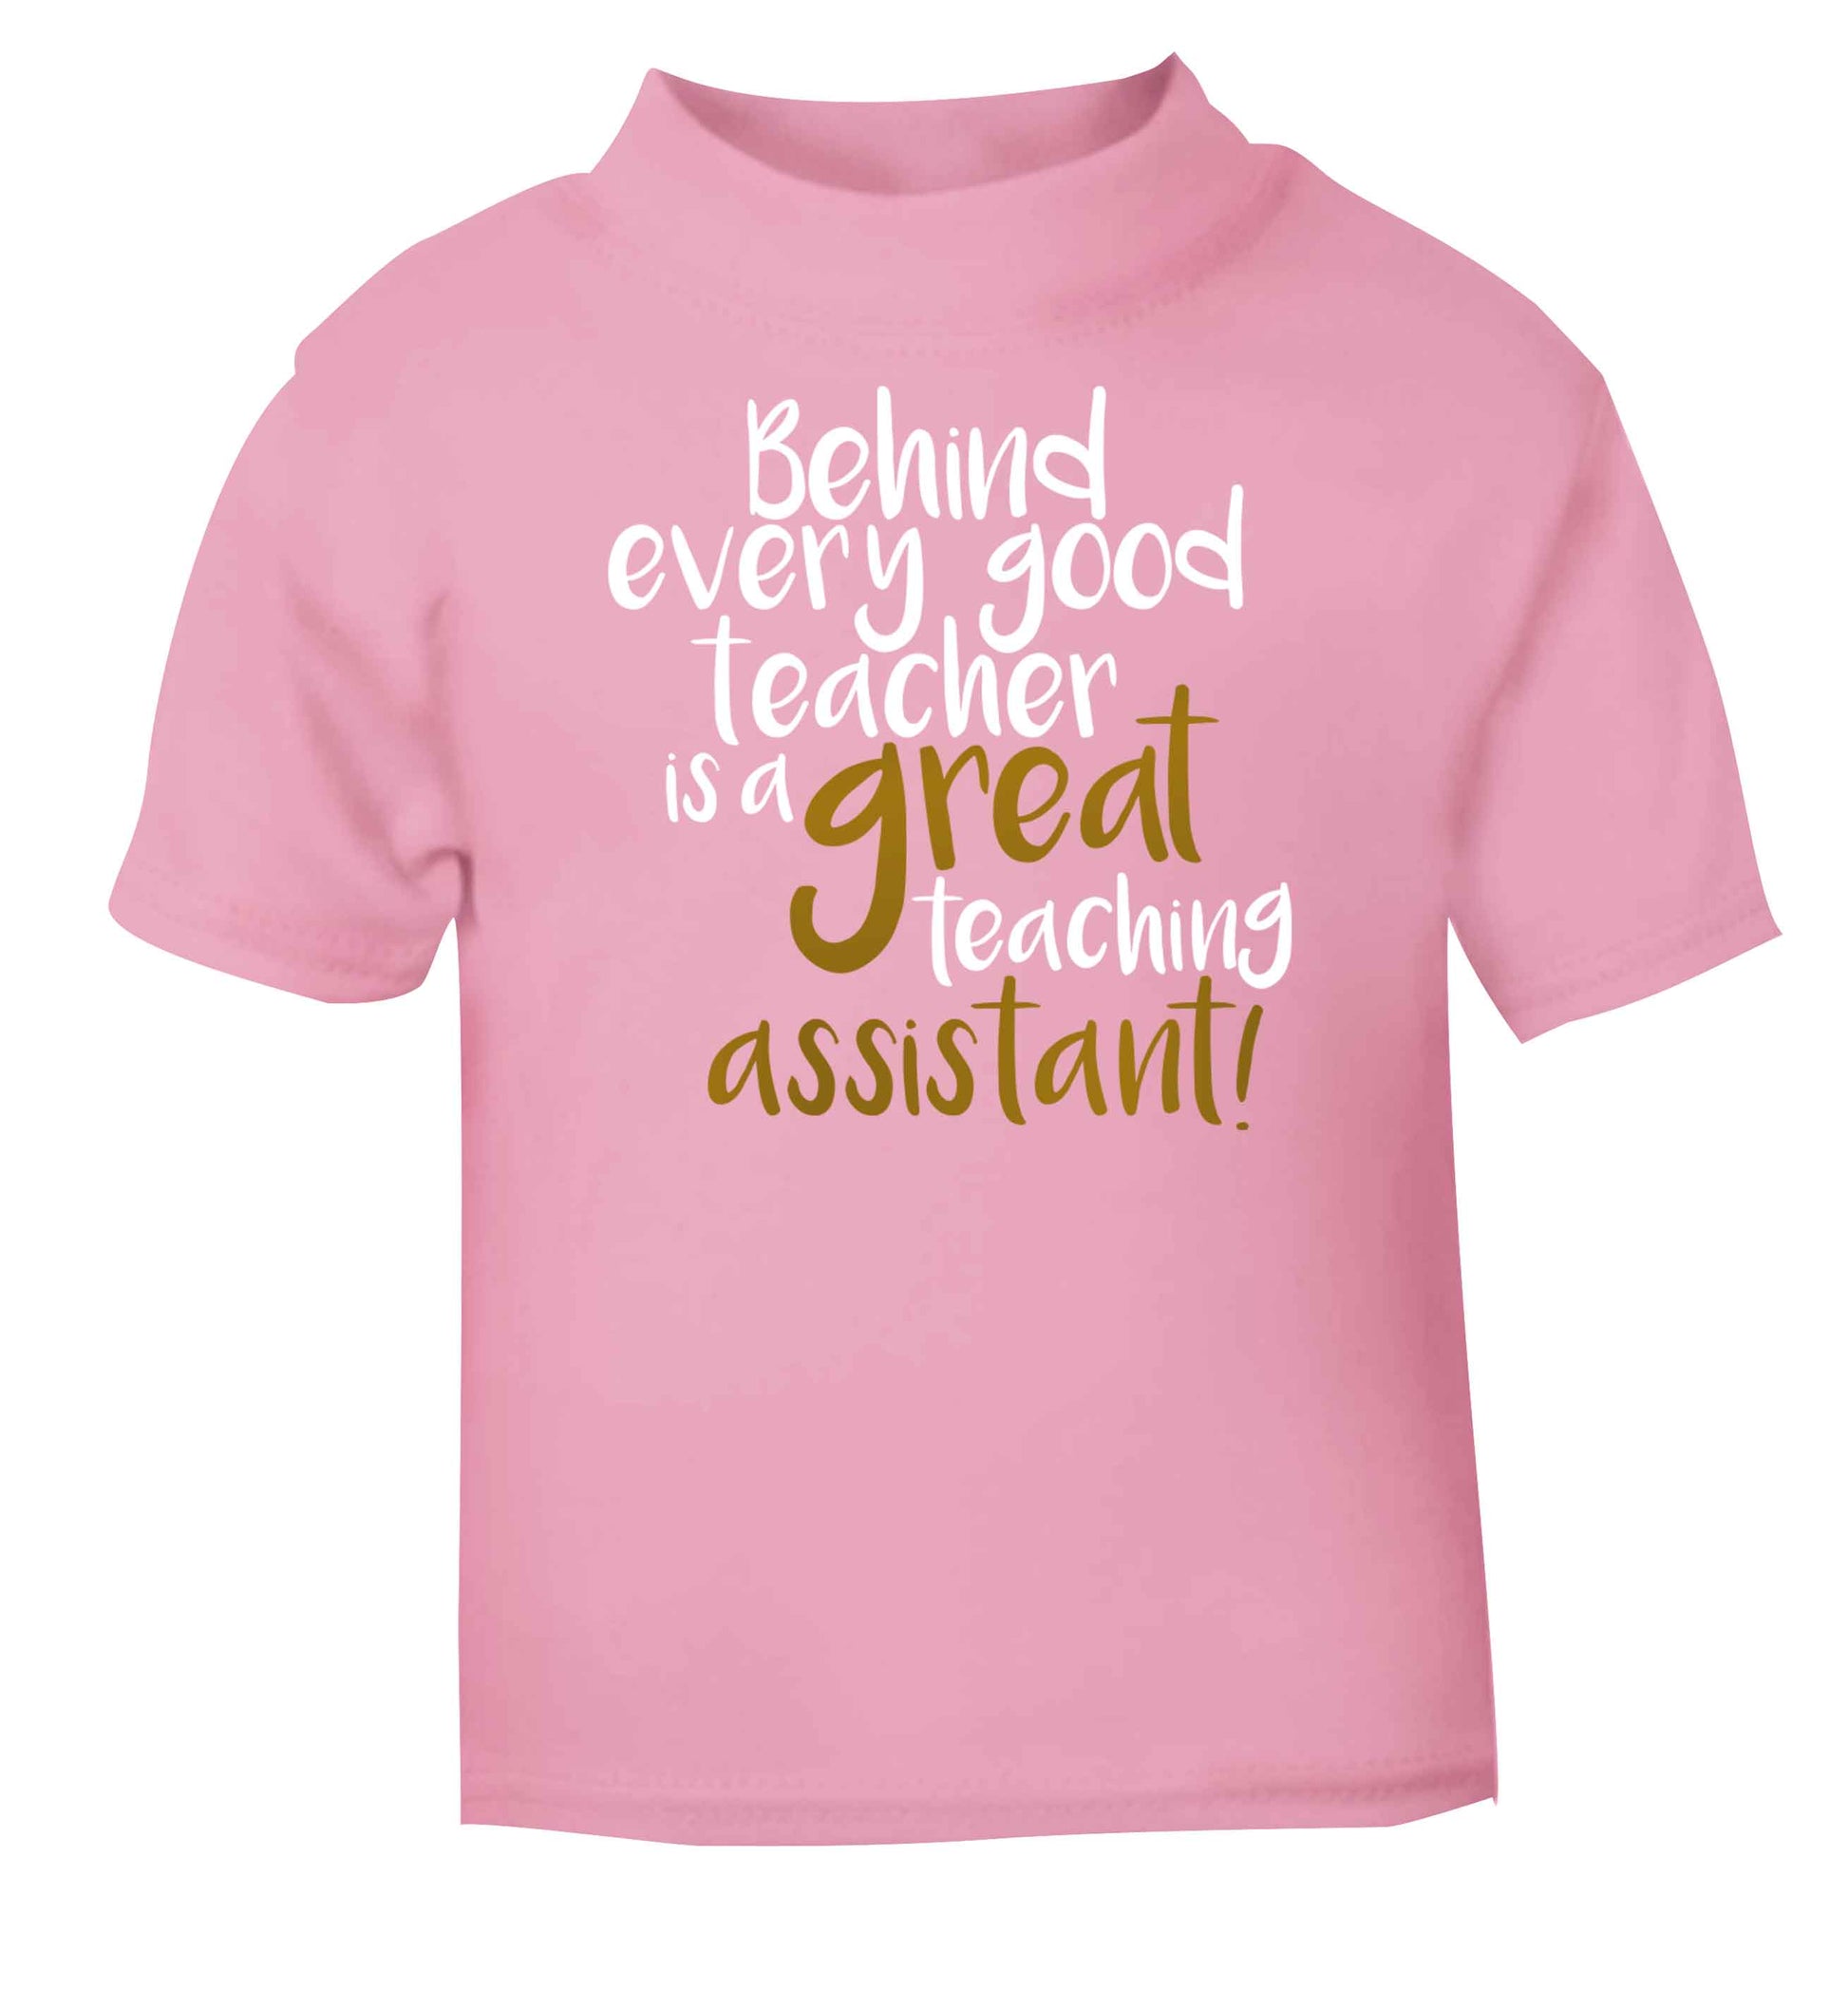 Behind every good teacher is a great teaching assistant light pink baby toddler Tshirt 2 Years